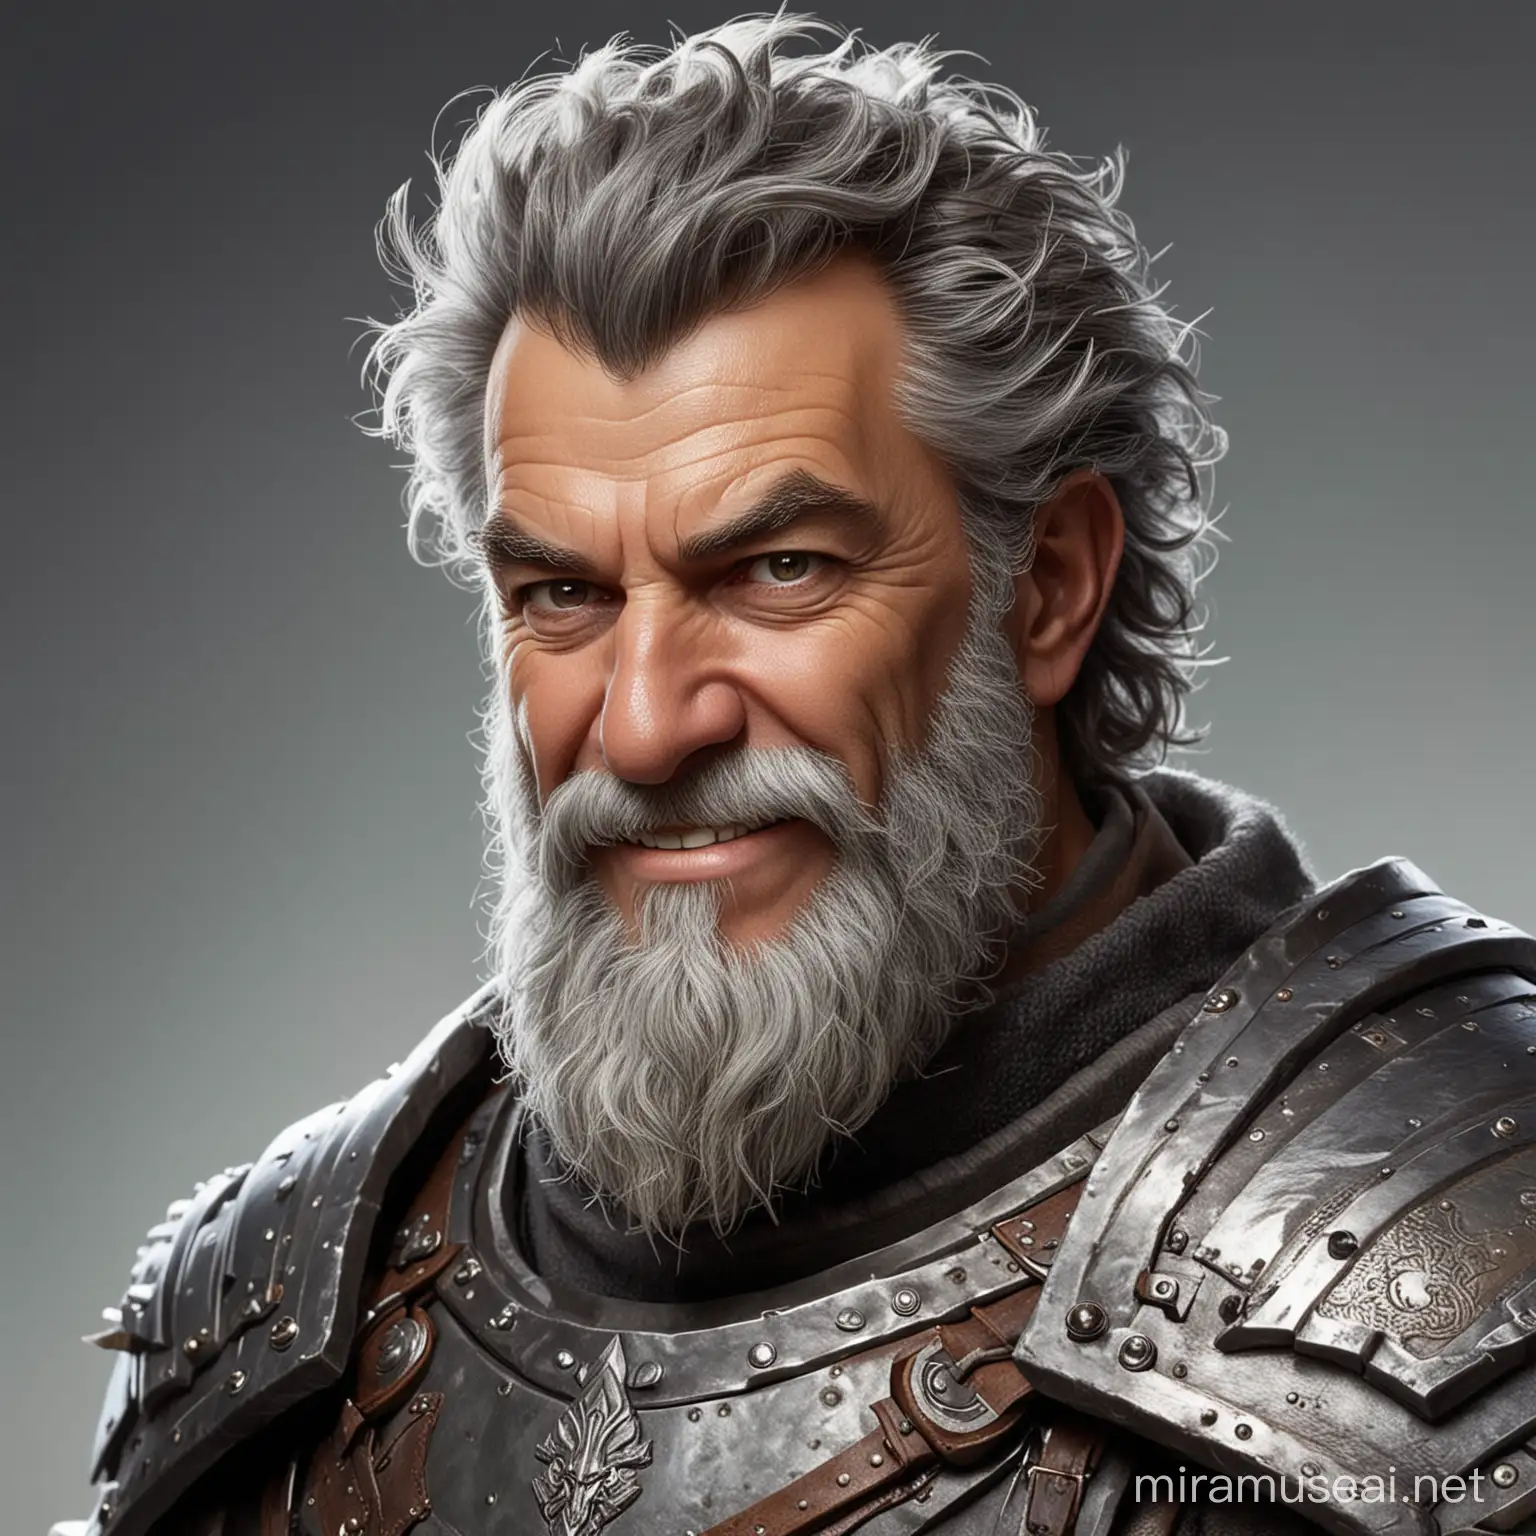 DND Artificer in his 60s. Short, gray, wild hair and bushy beard. Wearing heavy armor. Tough expression with a slight cocky grin.